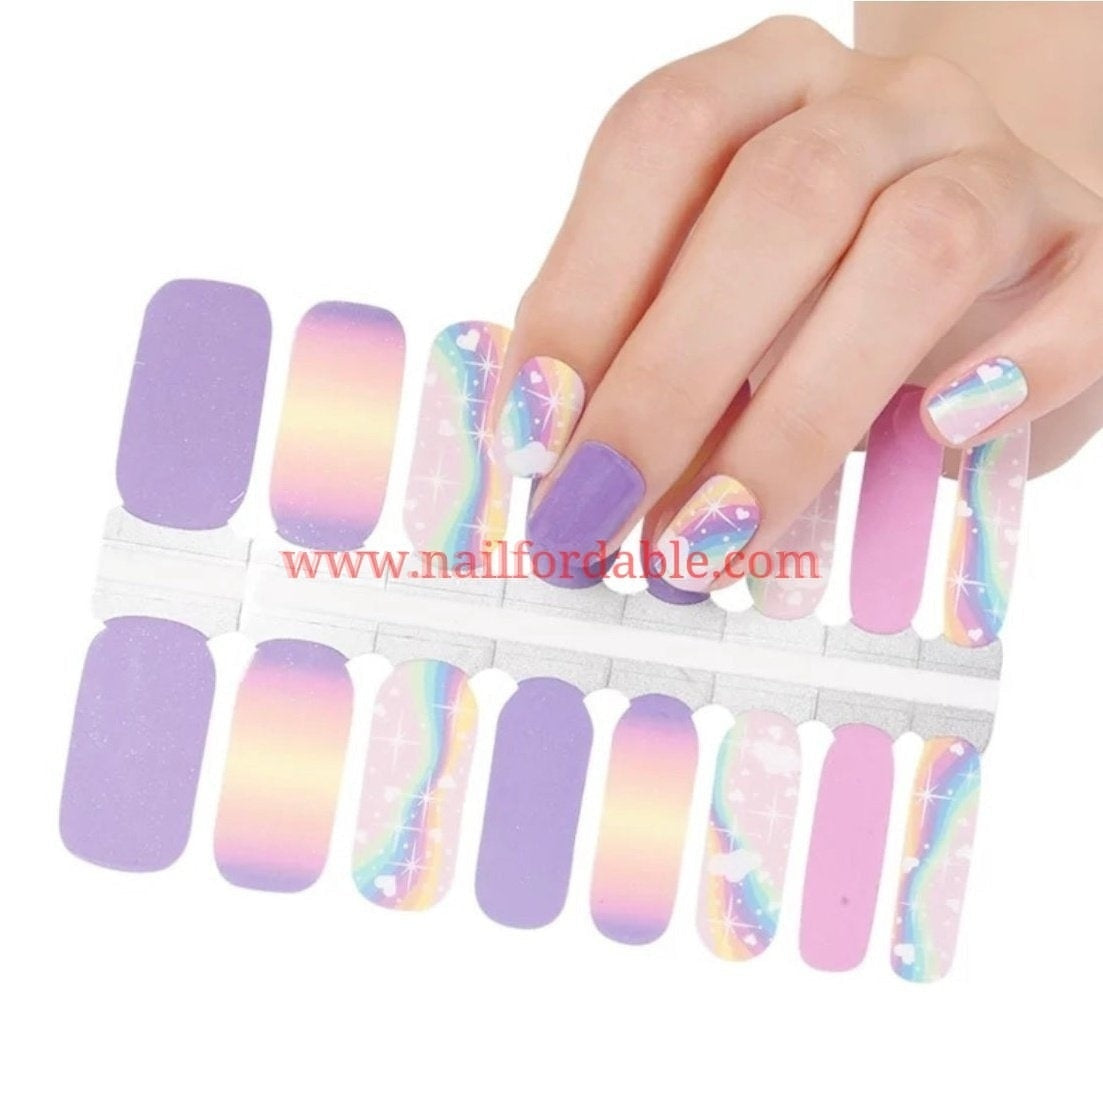 NAILFORDABLE!-Hundreds of Nail Polish Wraps' Styles & Colors for $2.99